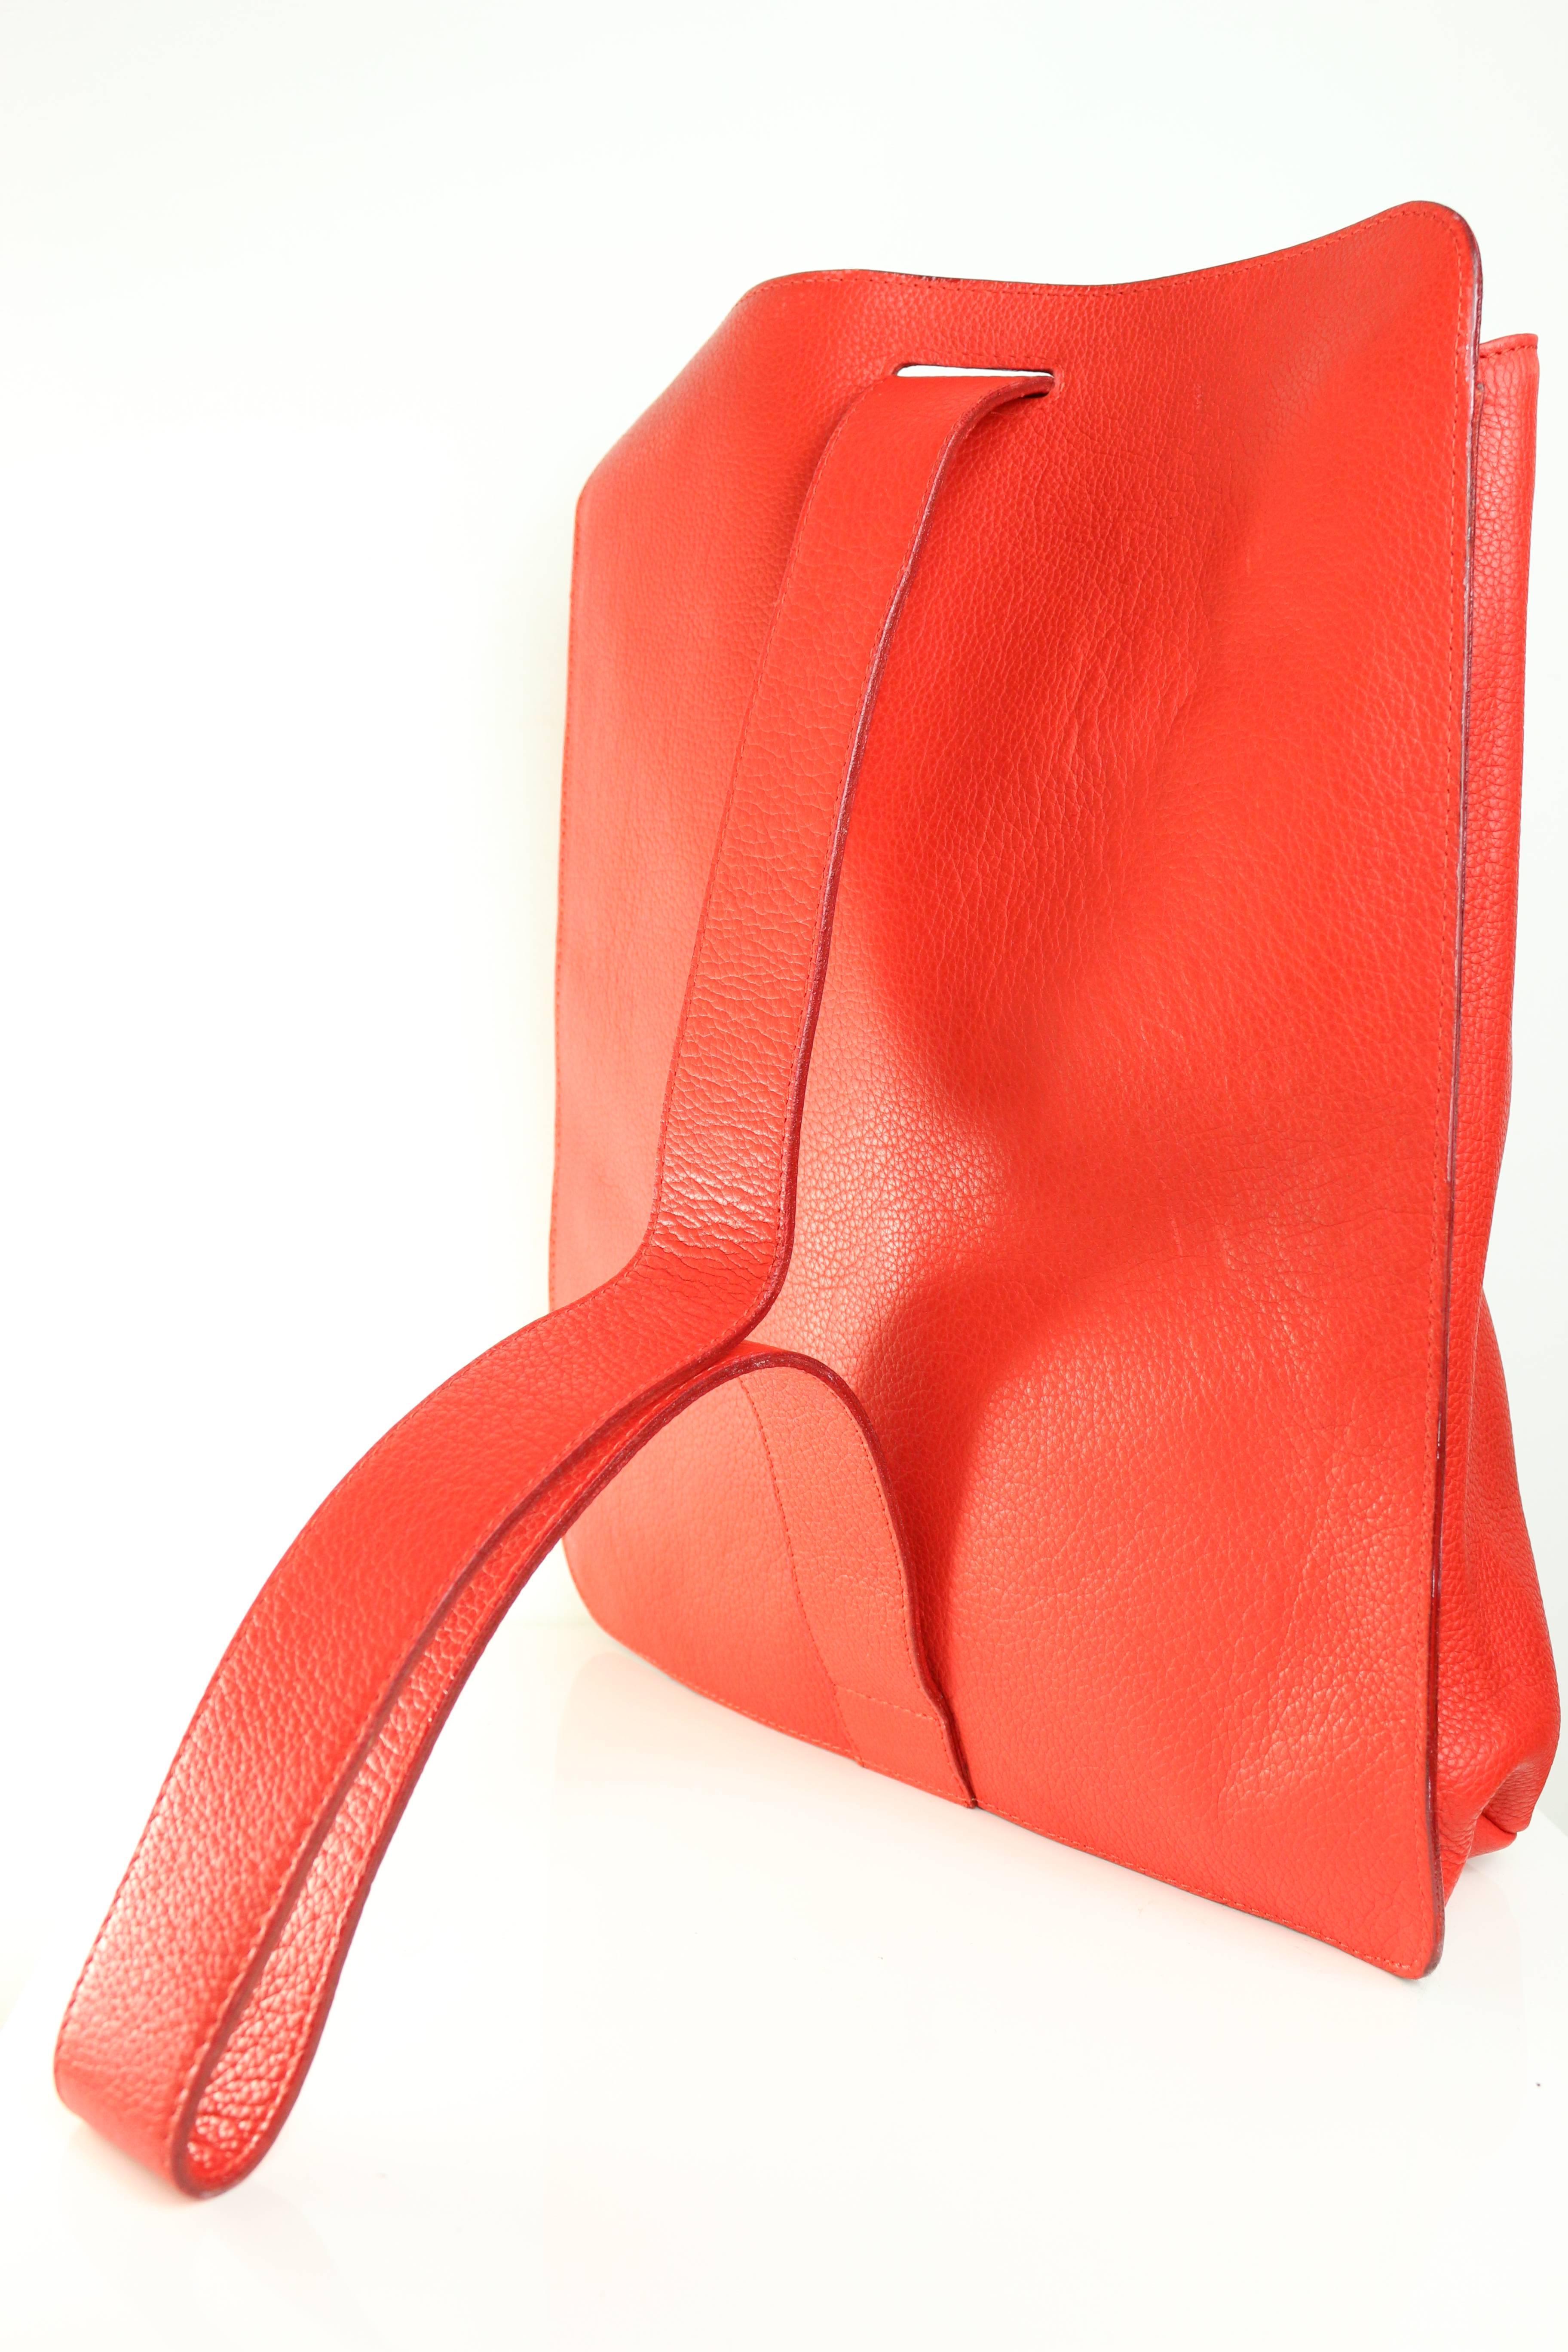 90s Gianni Versace Couture Red Leather Single Sling Strap Bag For Sale 1